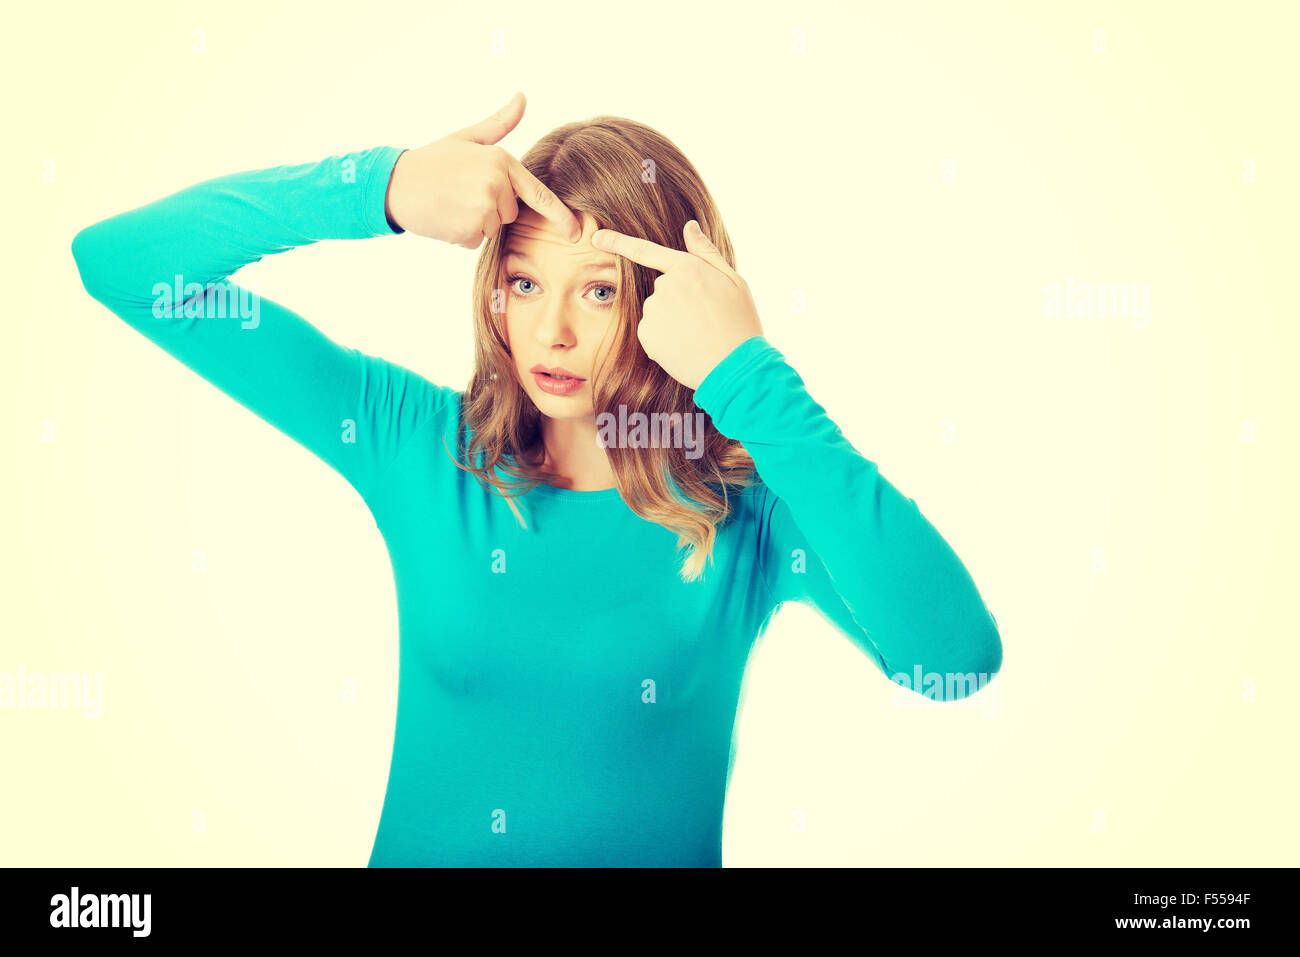 Young woman squeezing pimple Stock Photo